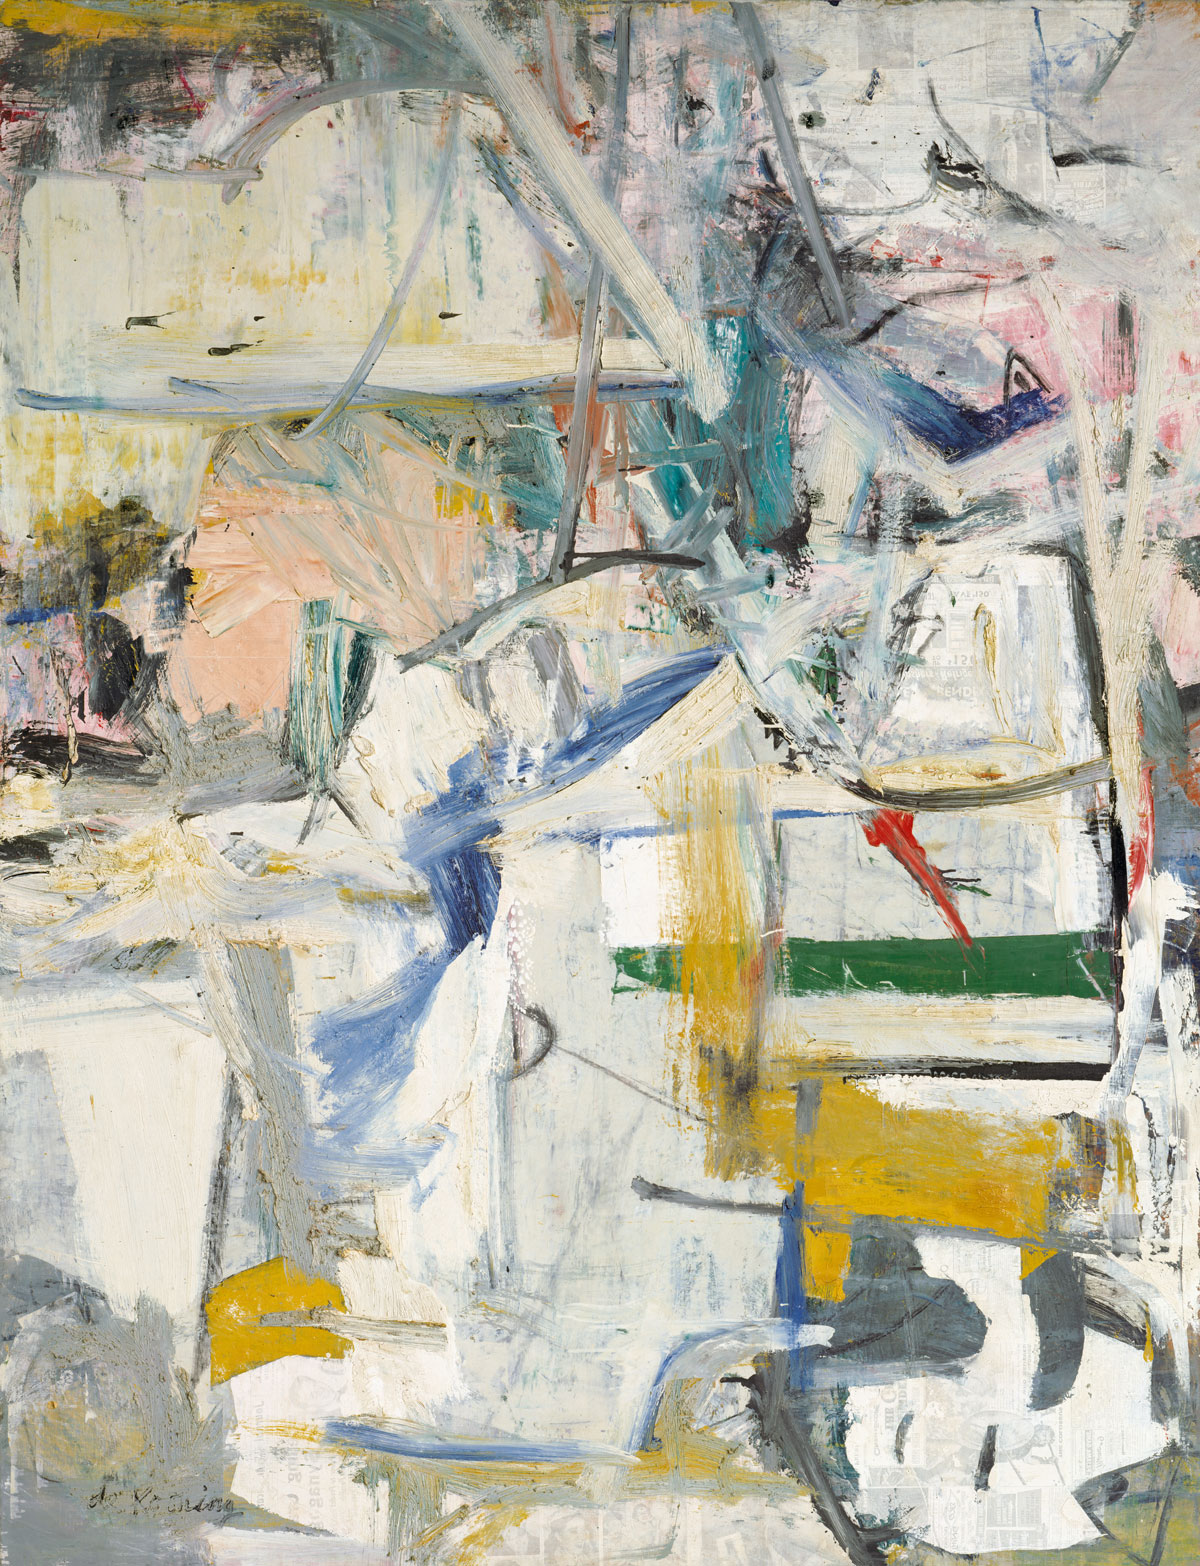 Easter Monday (1955–6) by Willem de Kooning, oil and newspaper transfer on canvas, 243.8 x 188 cm (96 x 74 in), The Metropolitan Museum